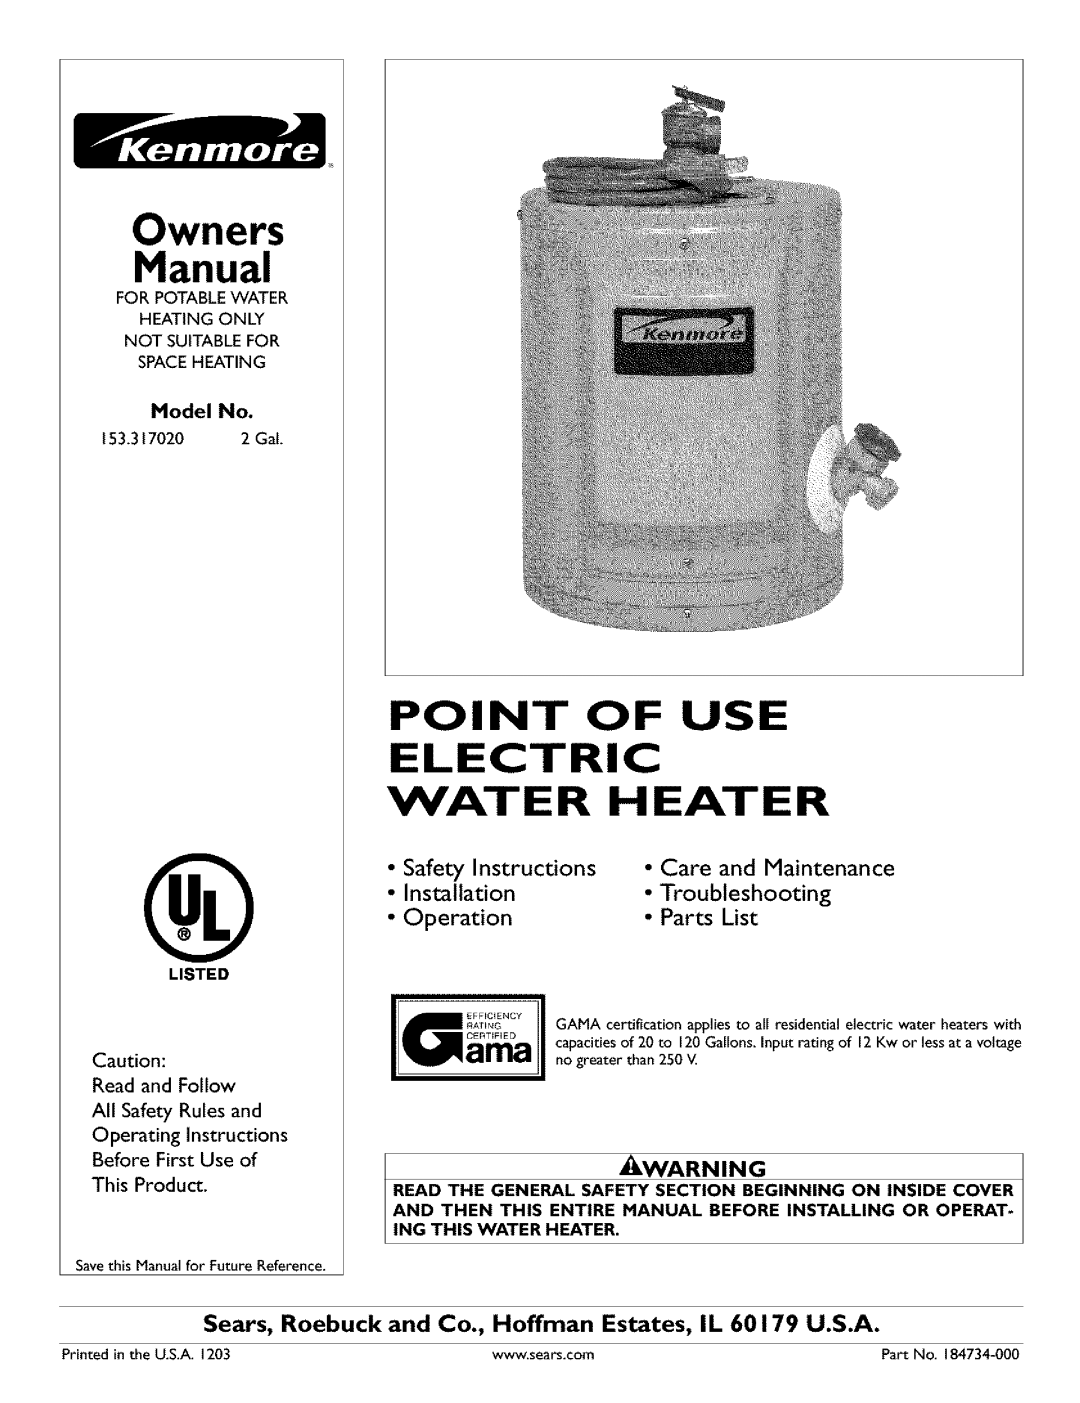 Kenmore 153.31702 owner manual Electric Water Heater, Installation, Point Of Use 